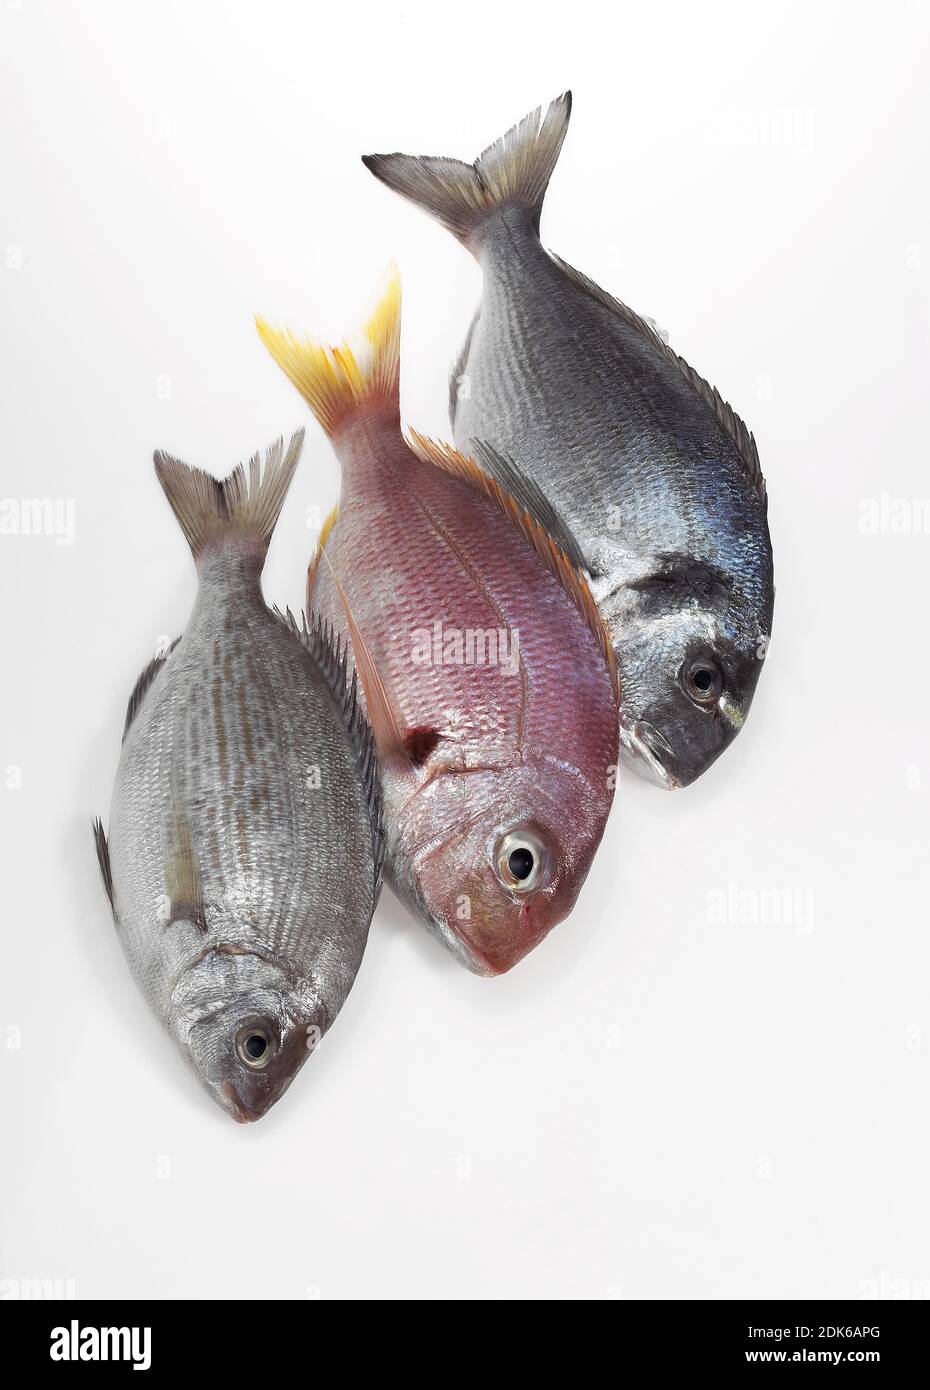 Fresh Fishes, Red Sea Bream, pagellus bogaraveo and Grey Sea Bream, pondyliosoma cantharus, and Gilthed Bream, sparus auratus Stock Photo